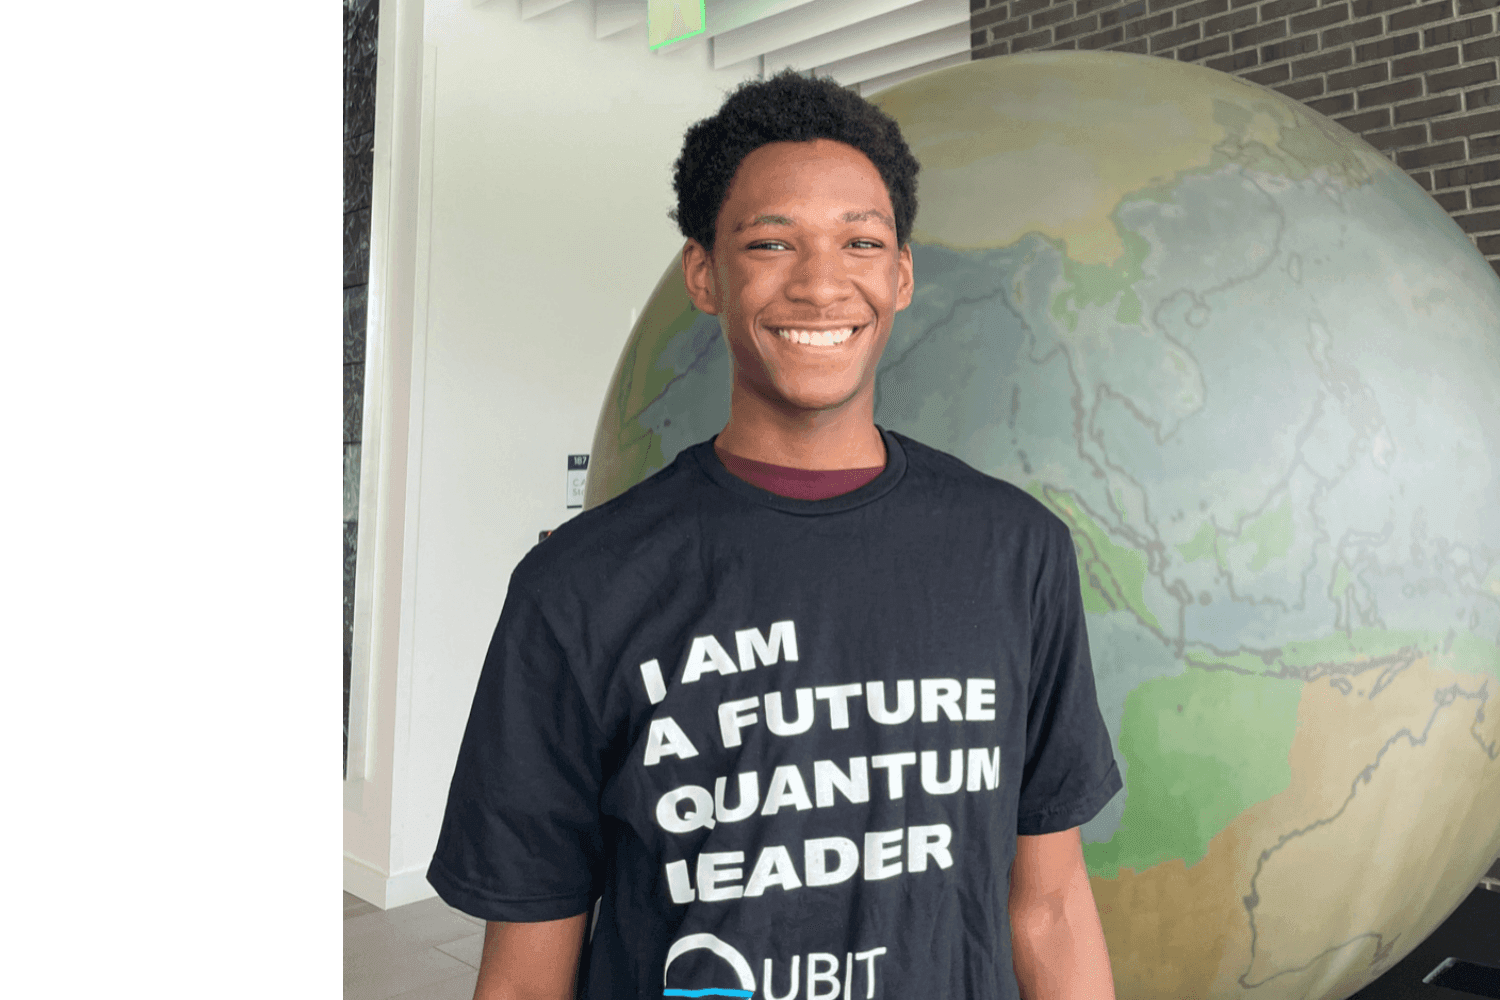 Robert, a high school senior from Colorado, was selected to participate in Qubit by Qubit’s national high school summer research program.